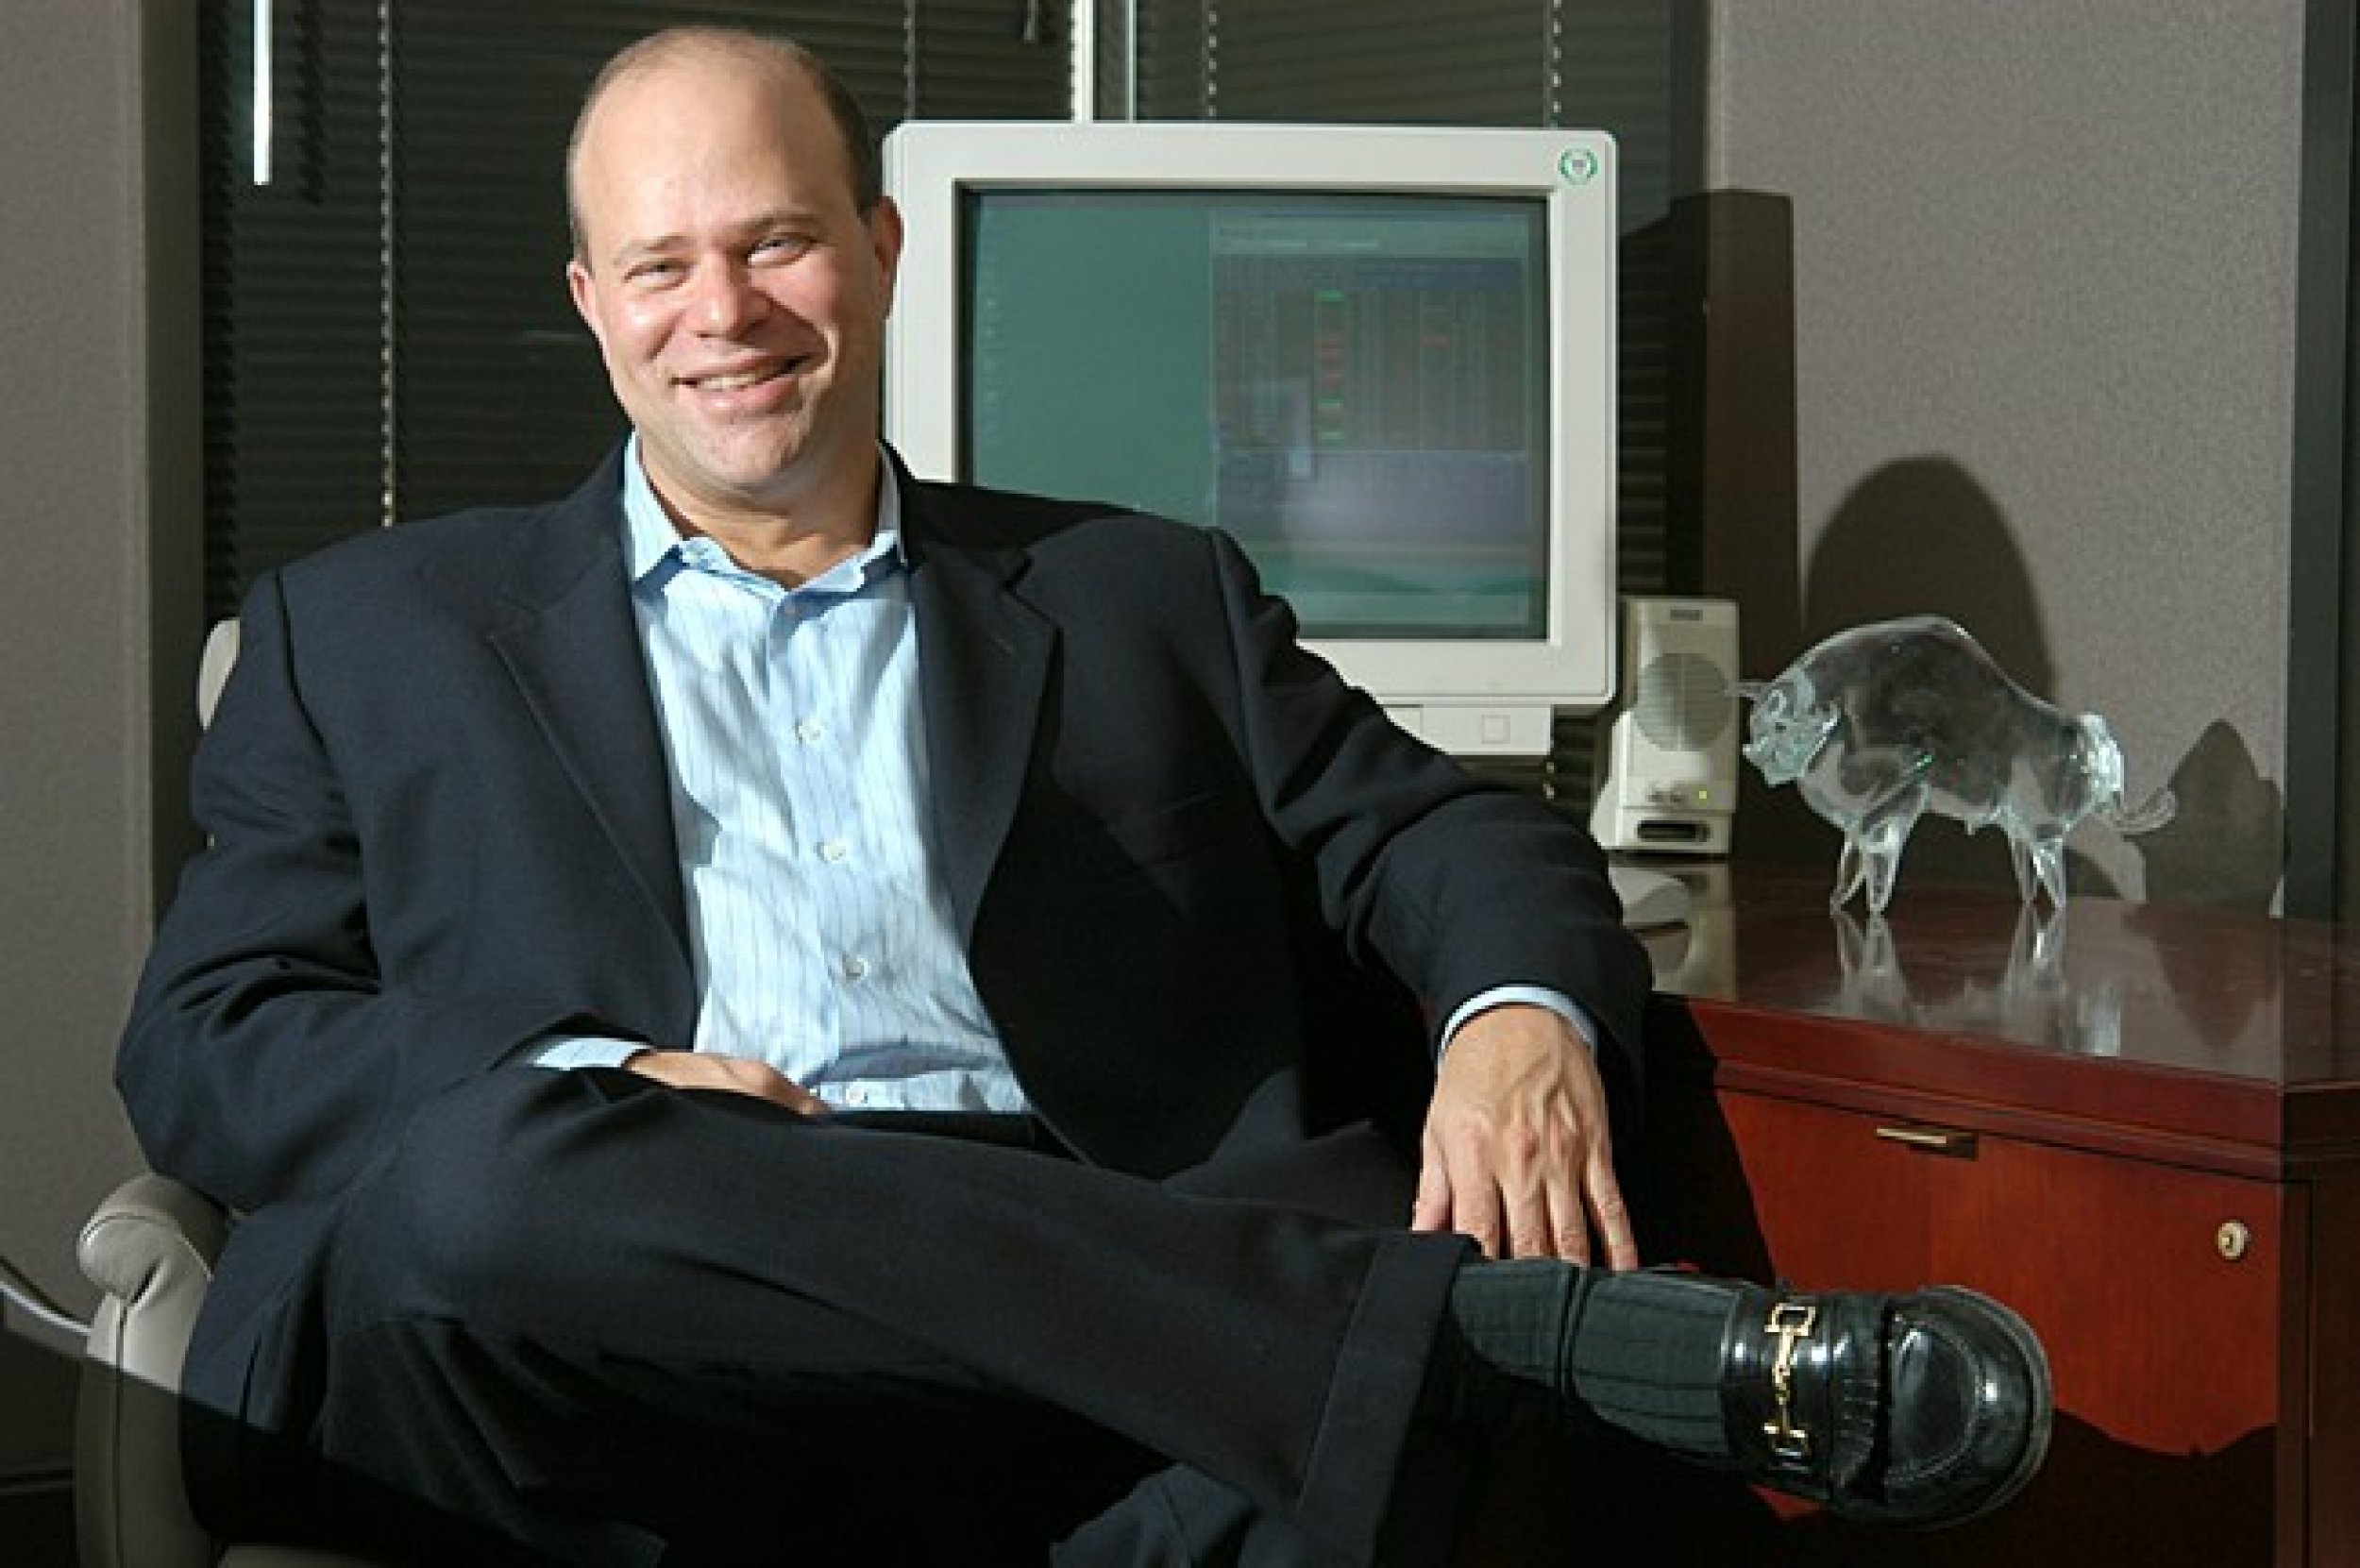 David Tepper, king of distressed investing